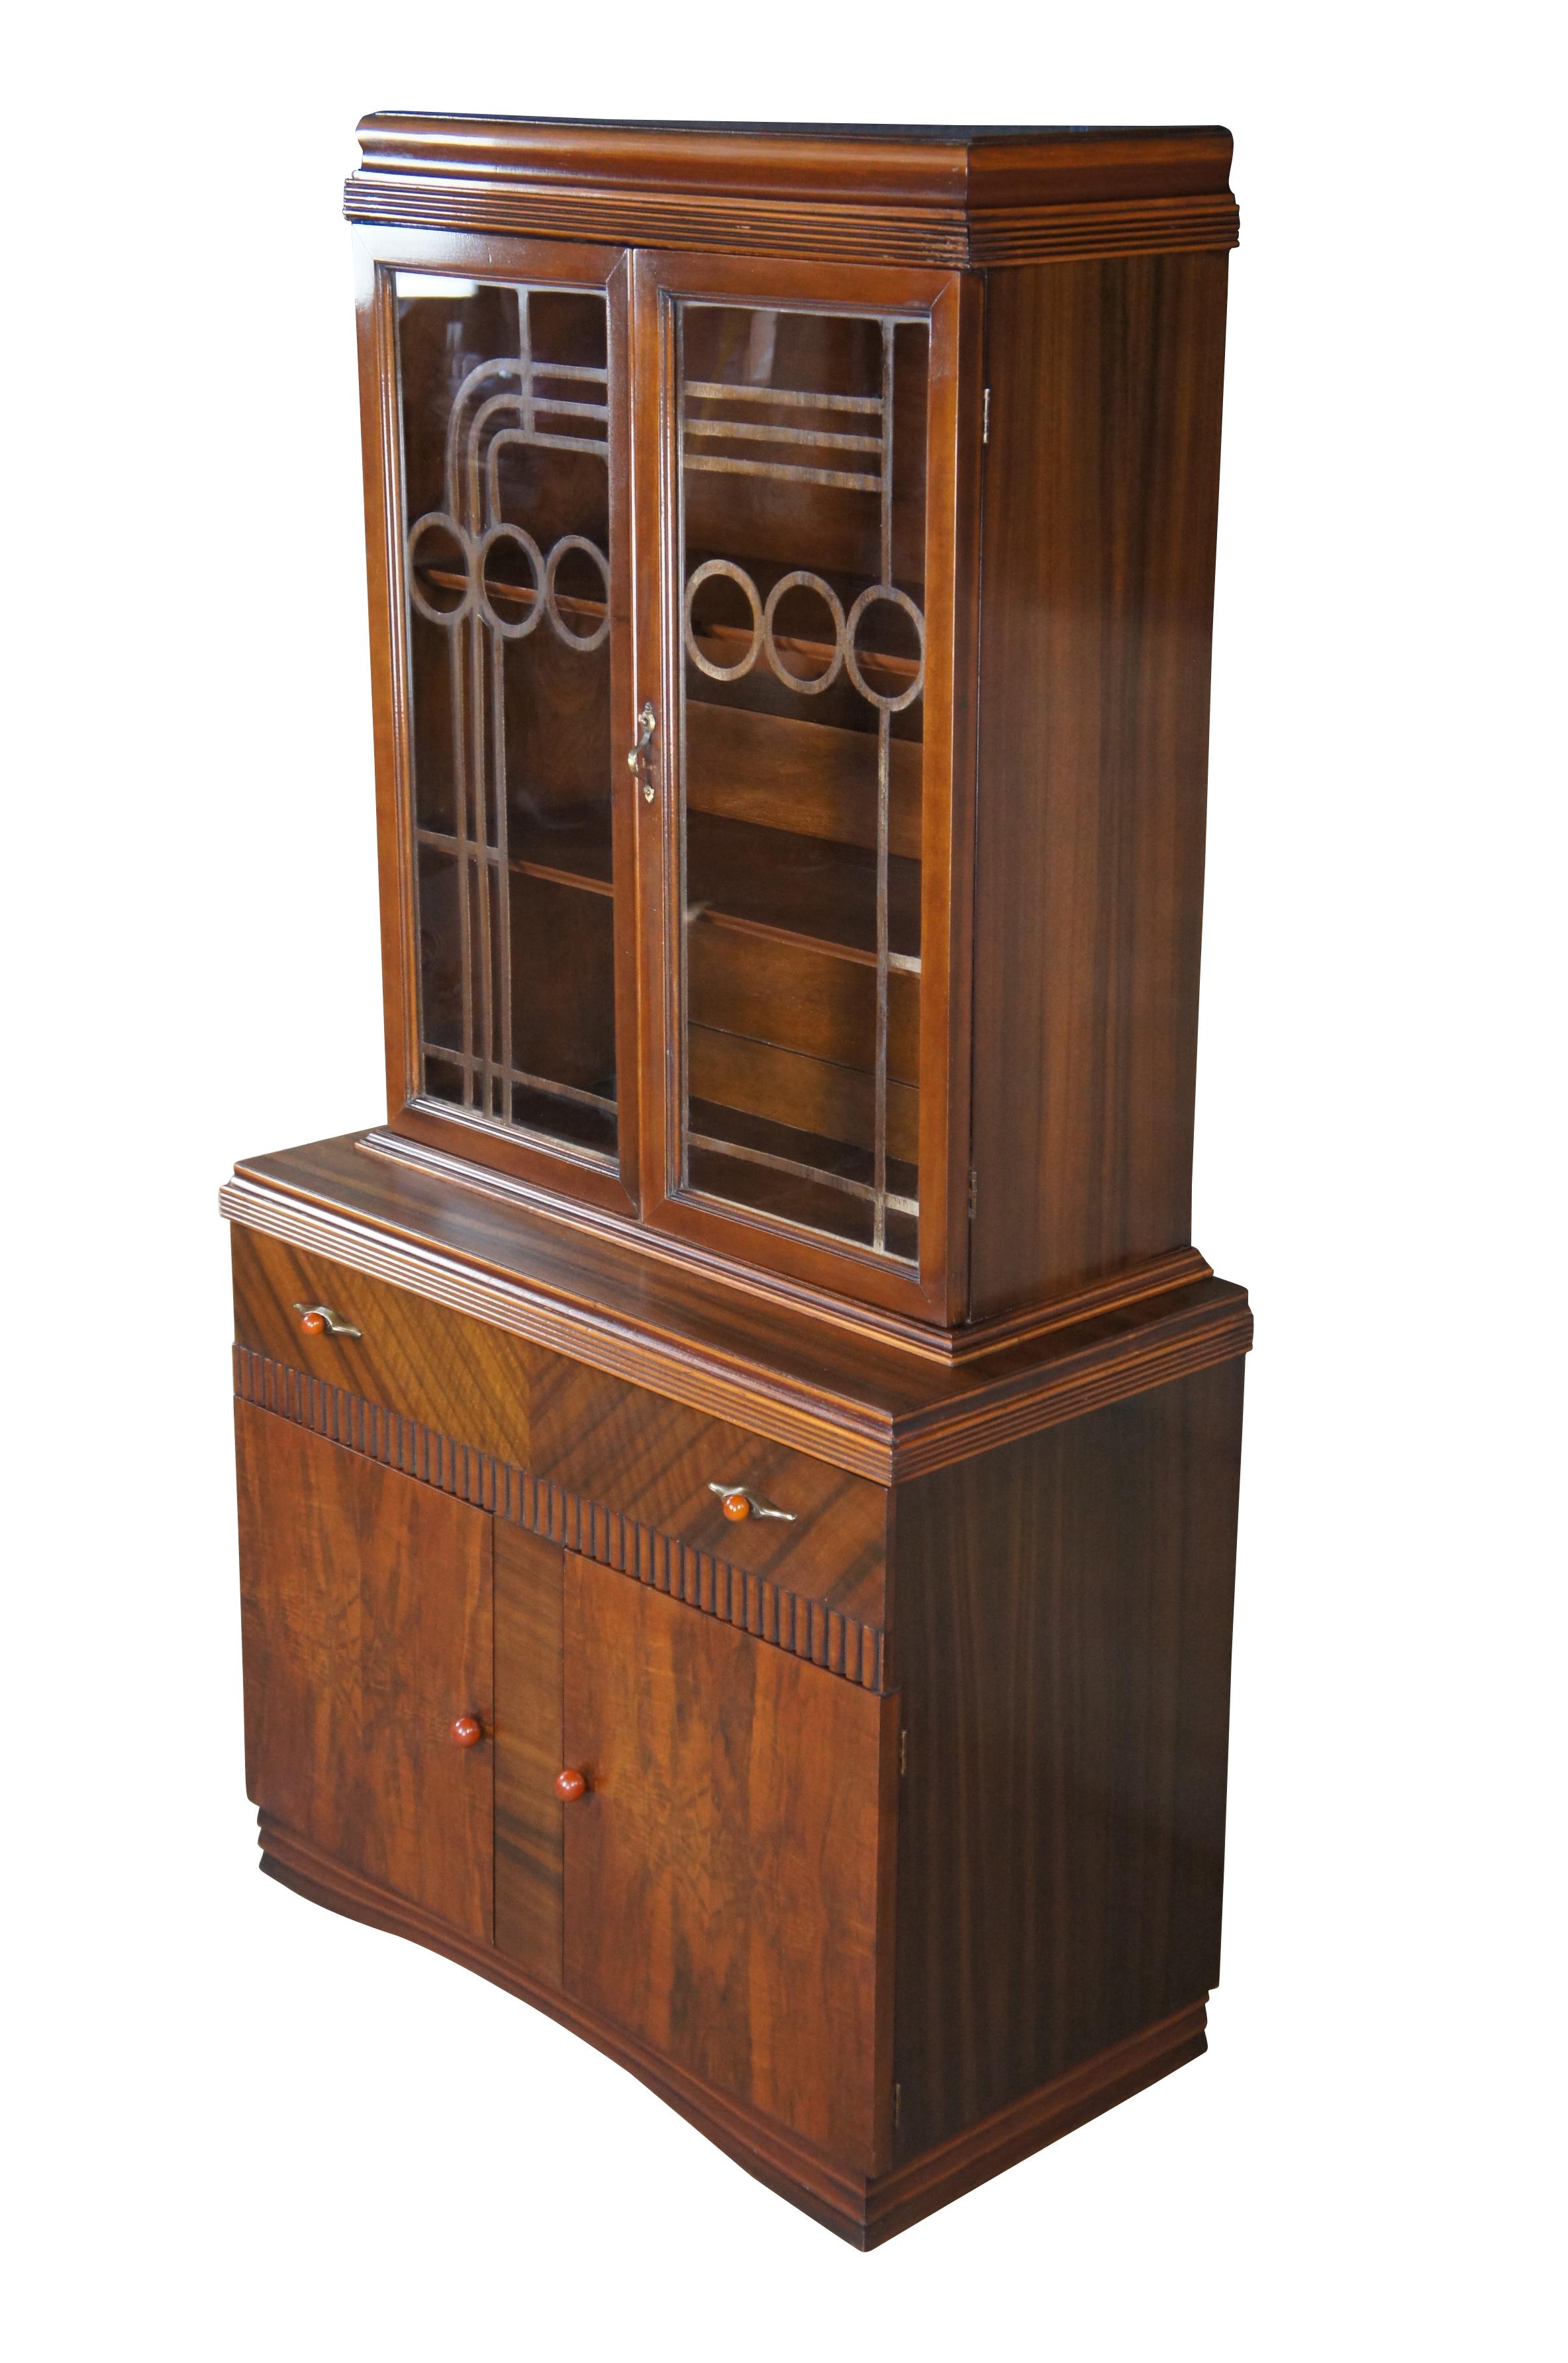 An amazing Art Deco display cabinet, circa 1930s. Made from walnut with an intriguing 